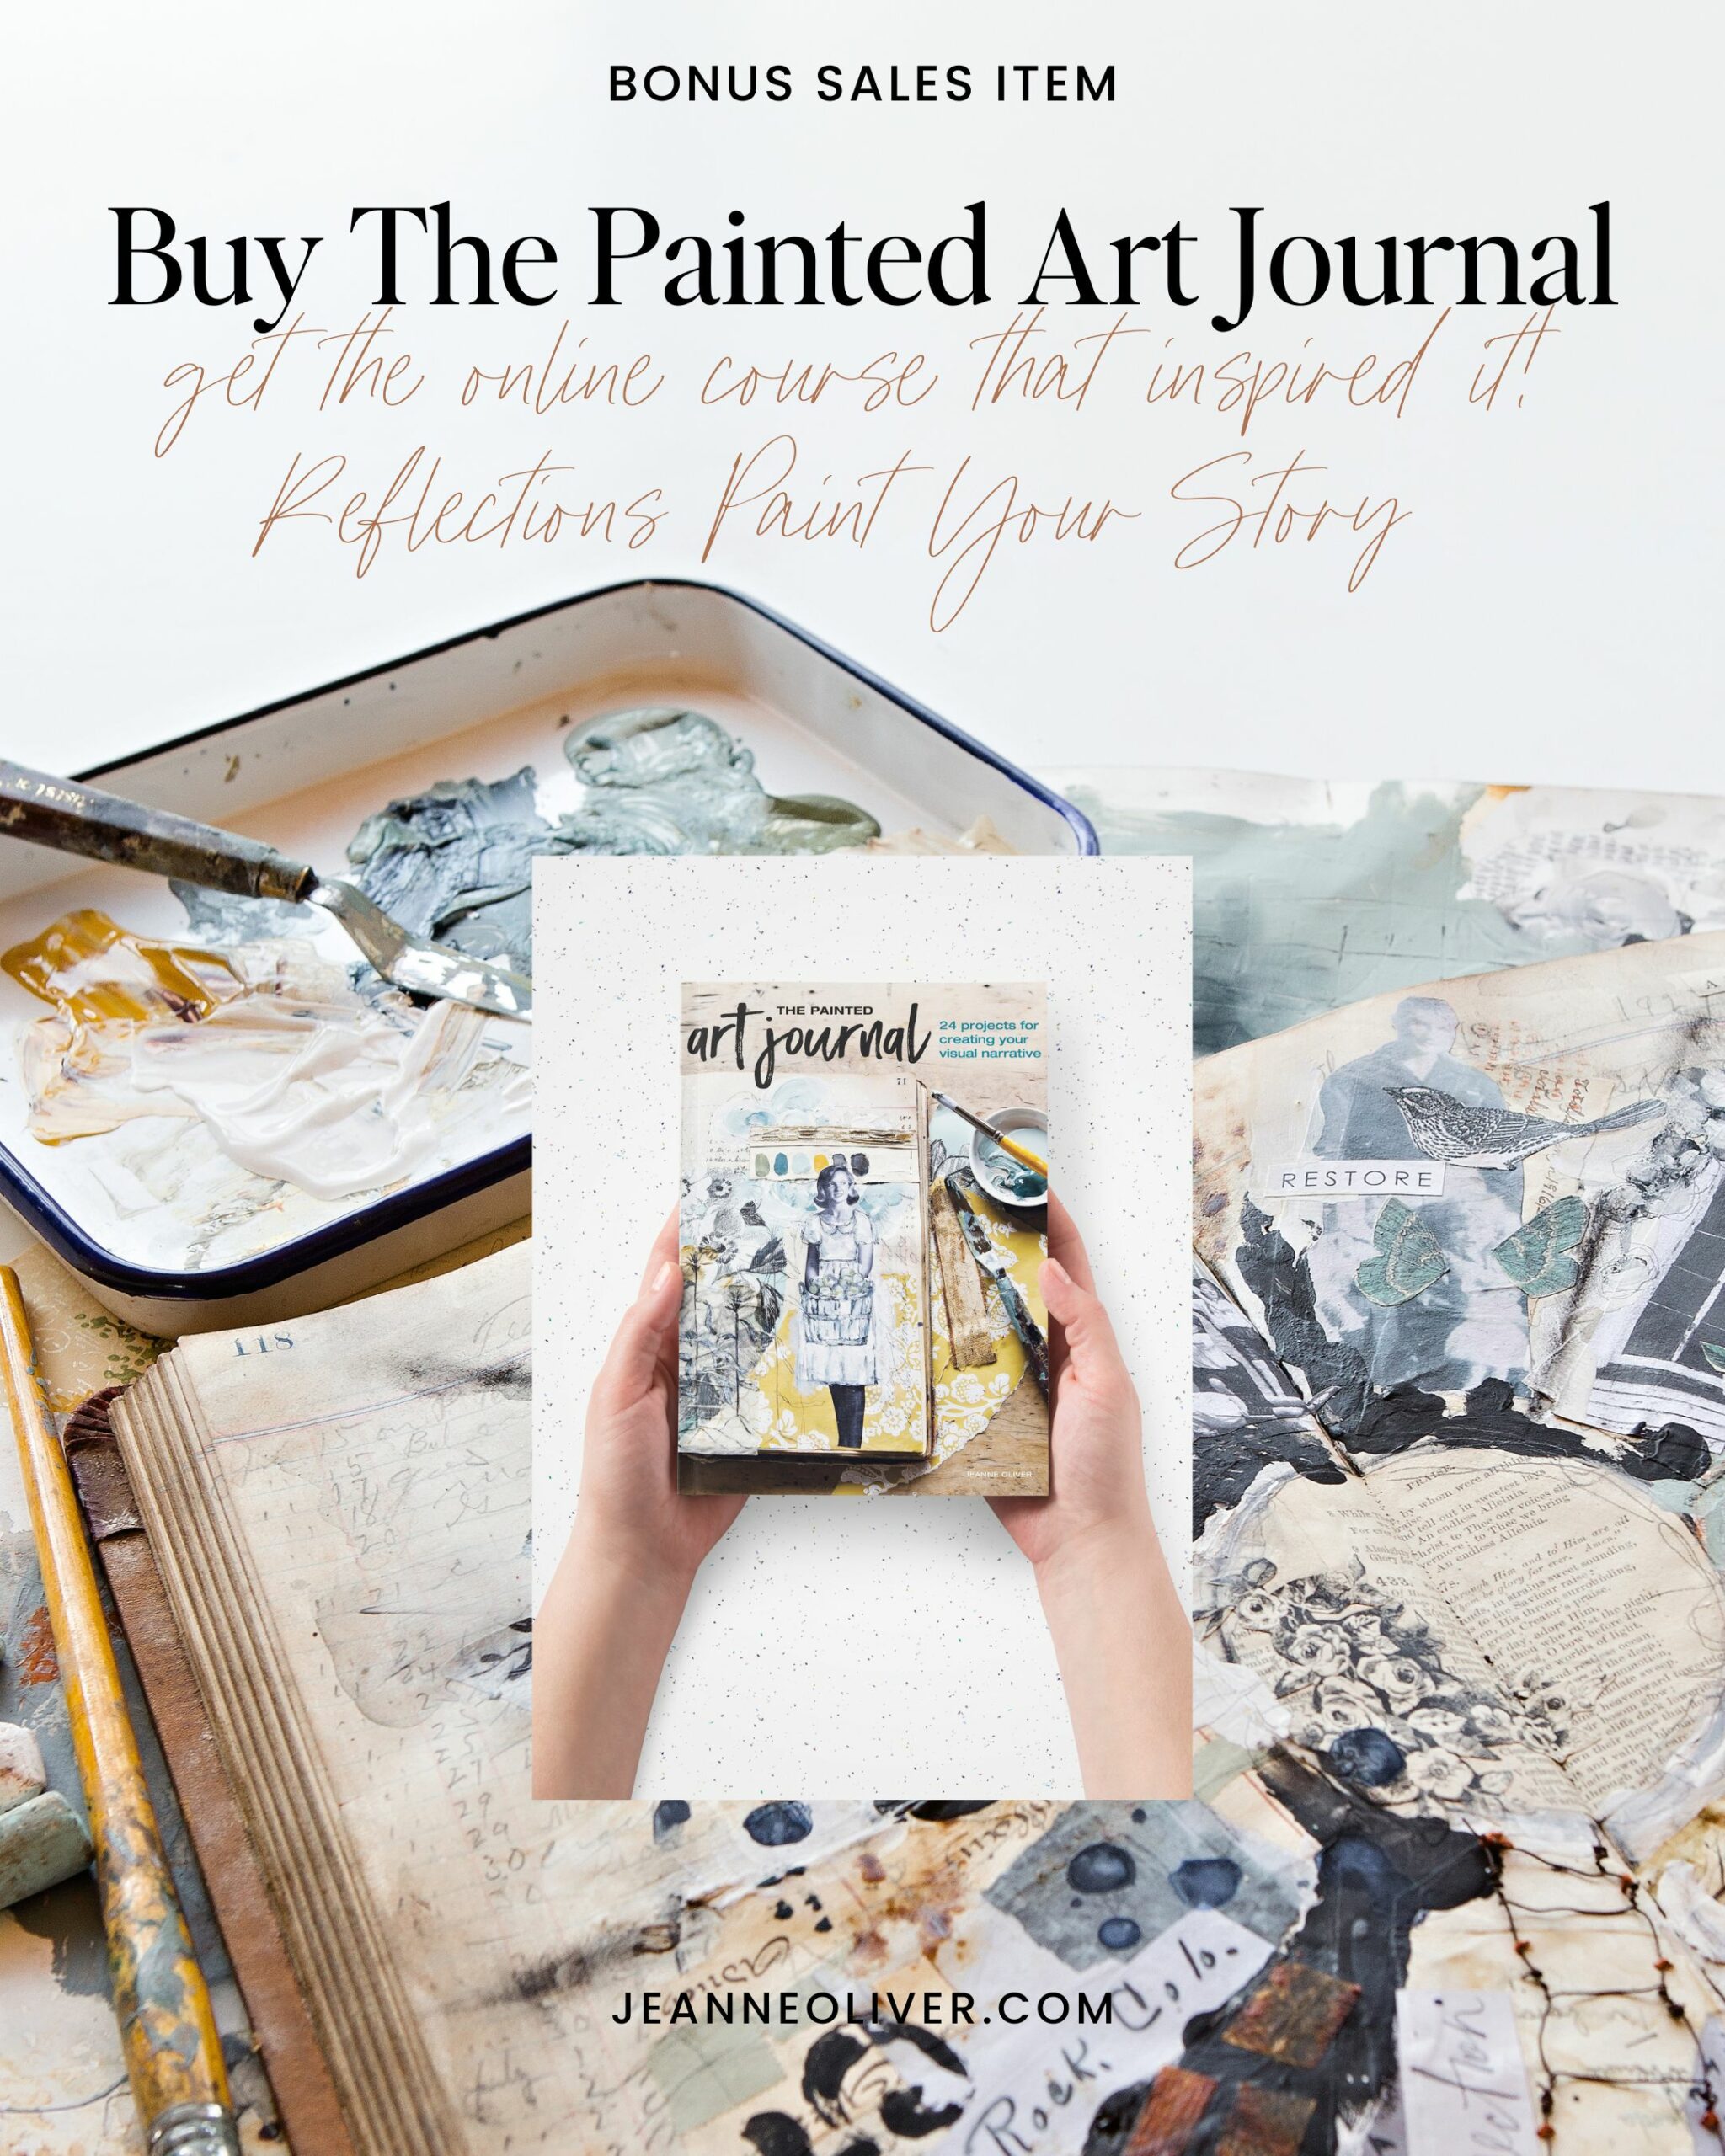 Bonus Sales Item | Buy The Painted Art Journal GET Reflections Paint Your Story for FREE